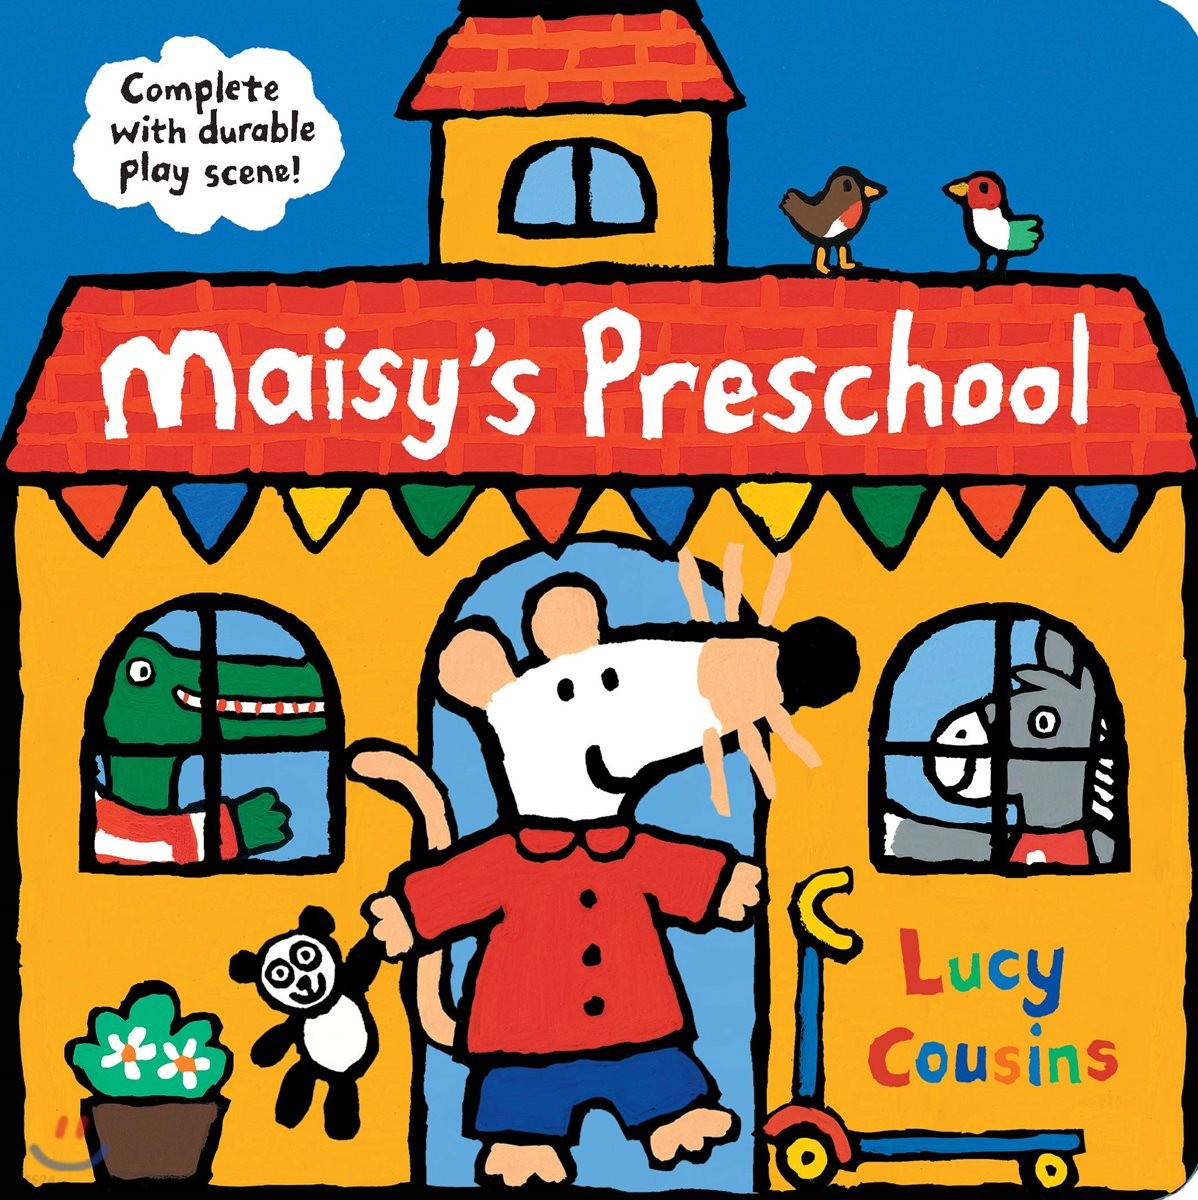 Maisys preschool: complete with durable play scene